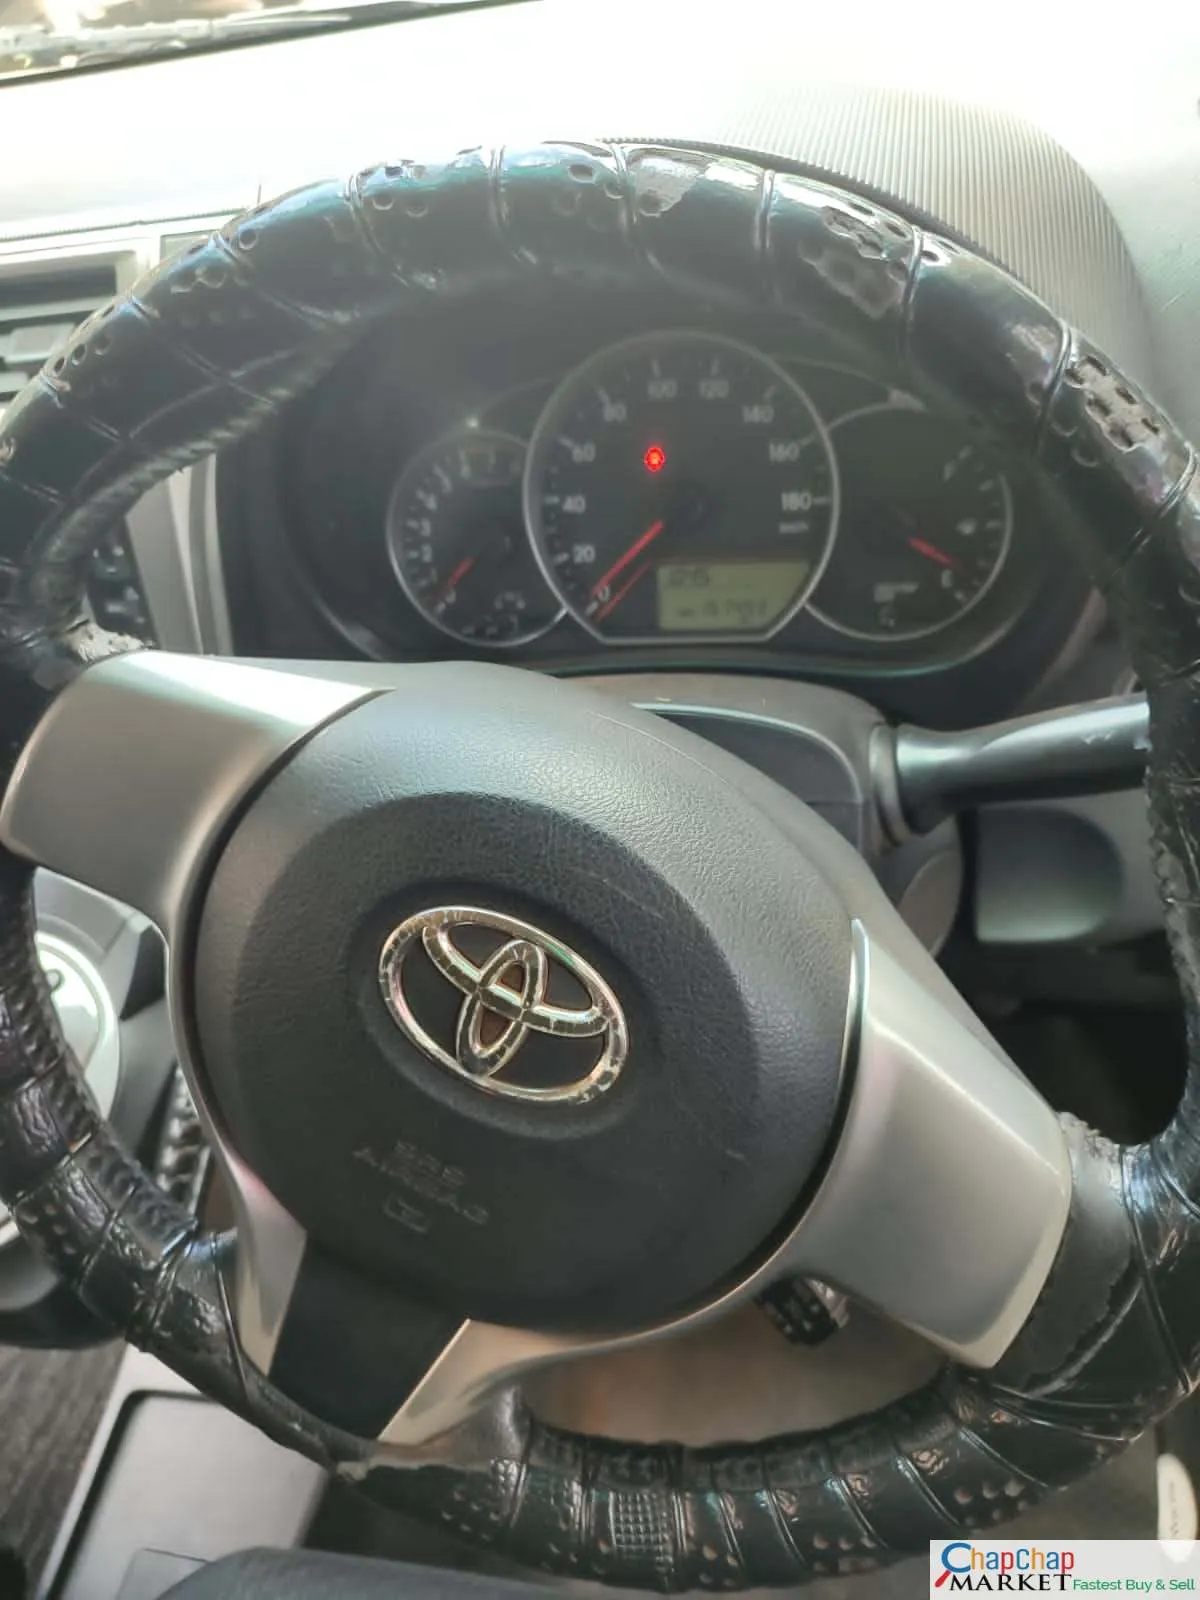 Toyota Ractis for sale in kenya HIRE PURCHASE installments You pay Deposit Trade in Ok ractis Kenya EXCLUSIVE